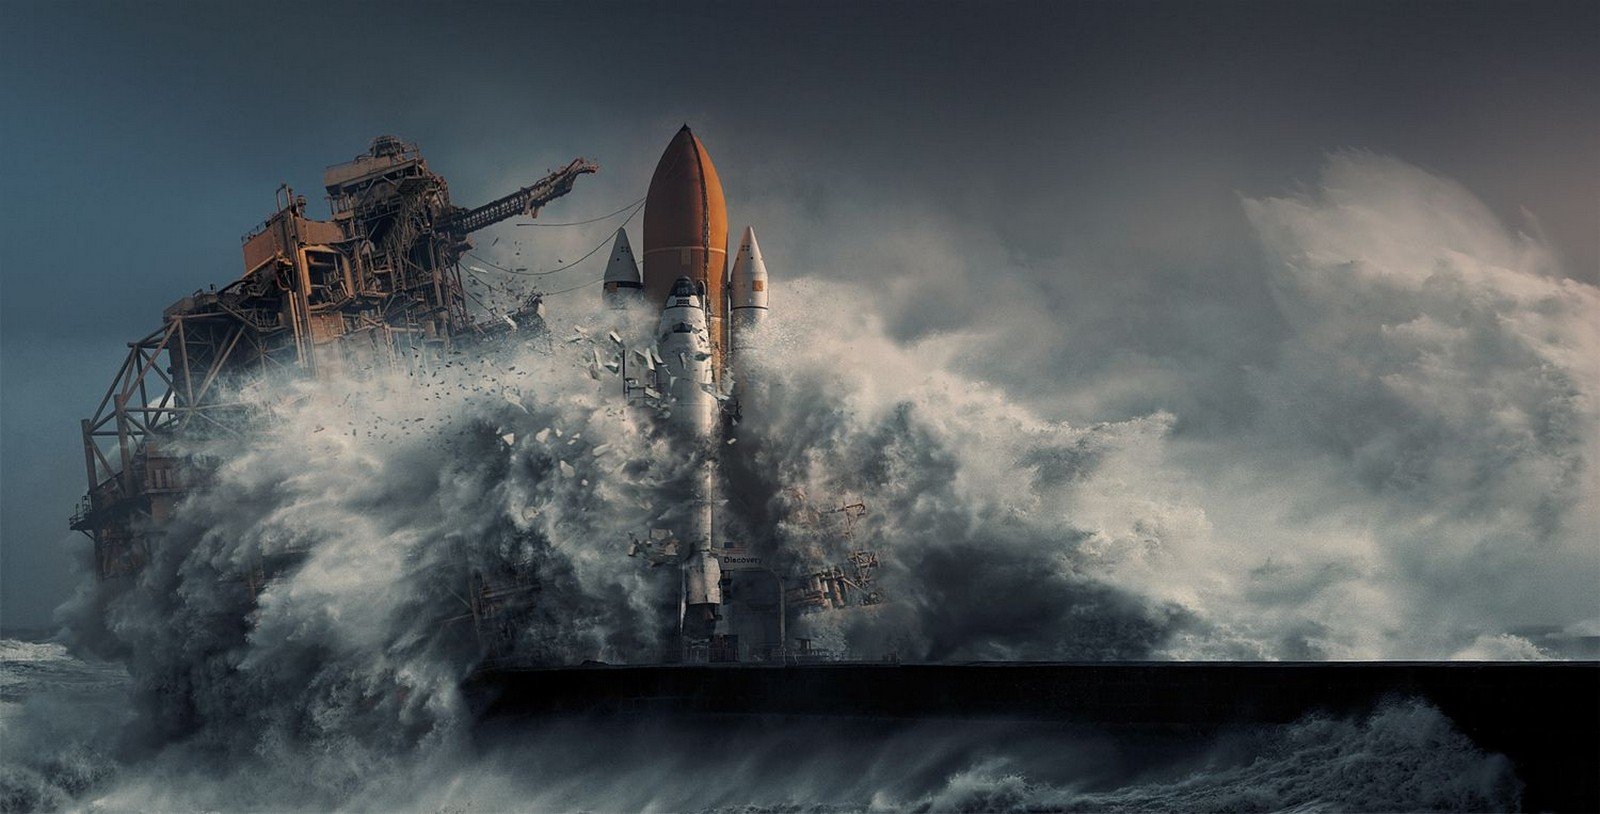 nature, Photography, Landscape, Apocalyptic, Digital art, Sea, Storm, Cape Canaveral, Space shuttle, Discovery Wallpaper